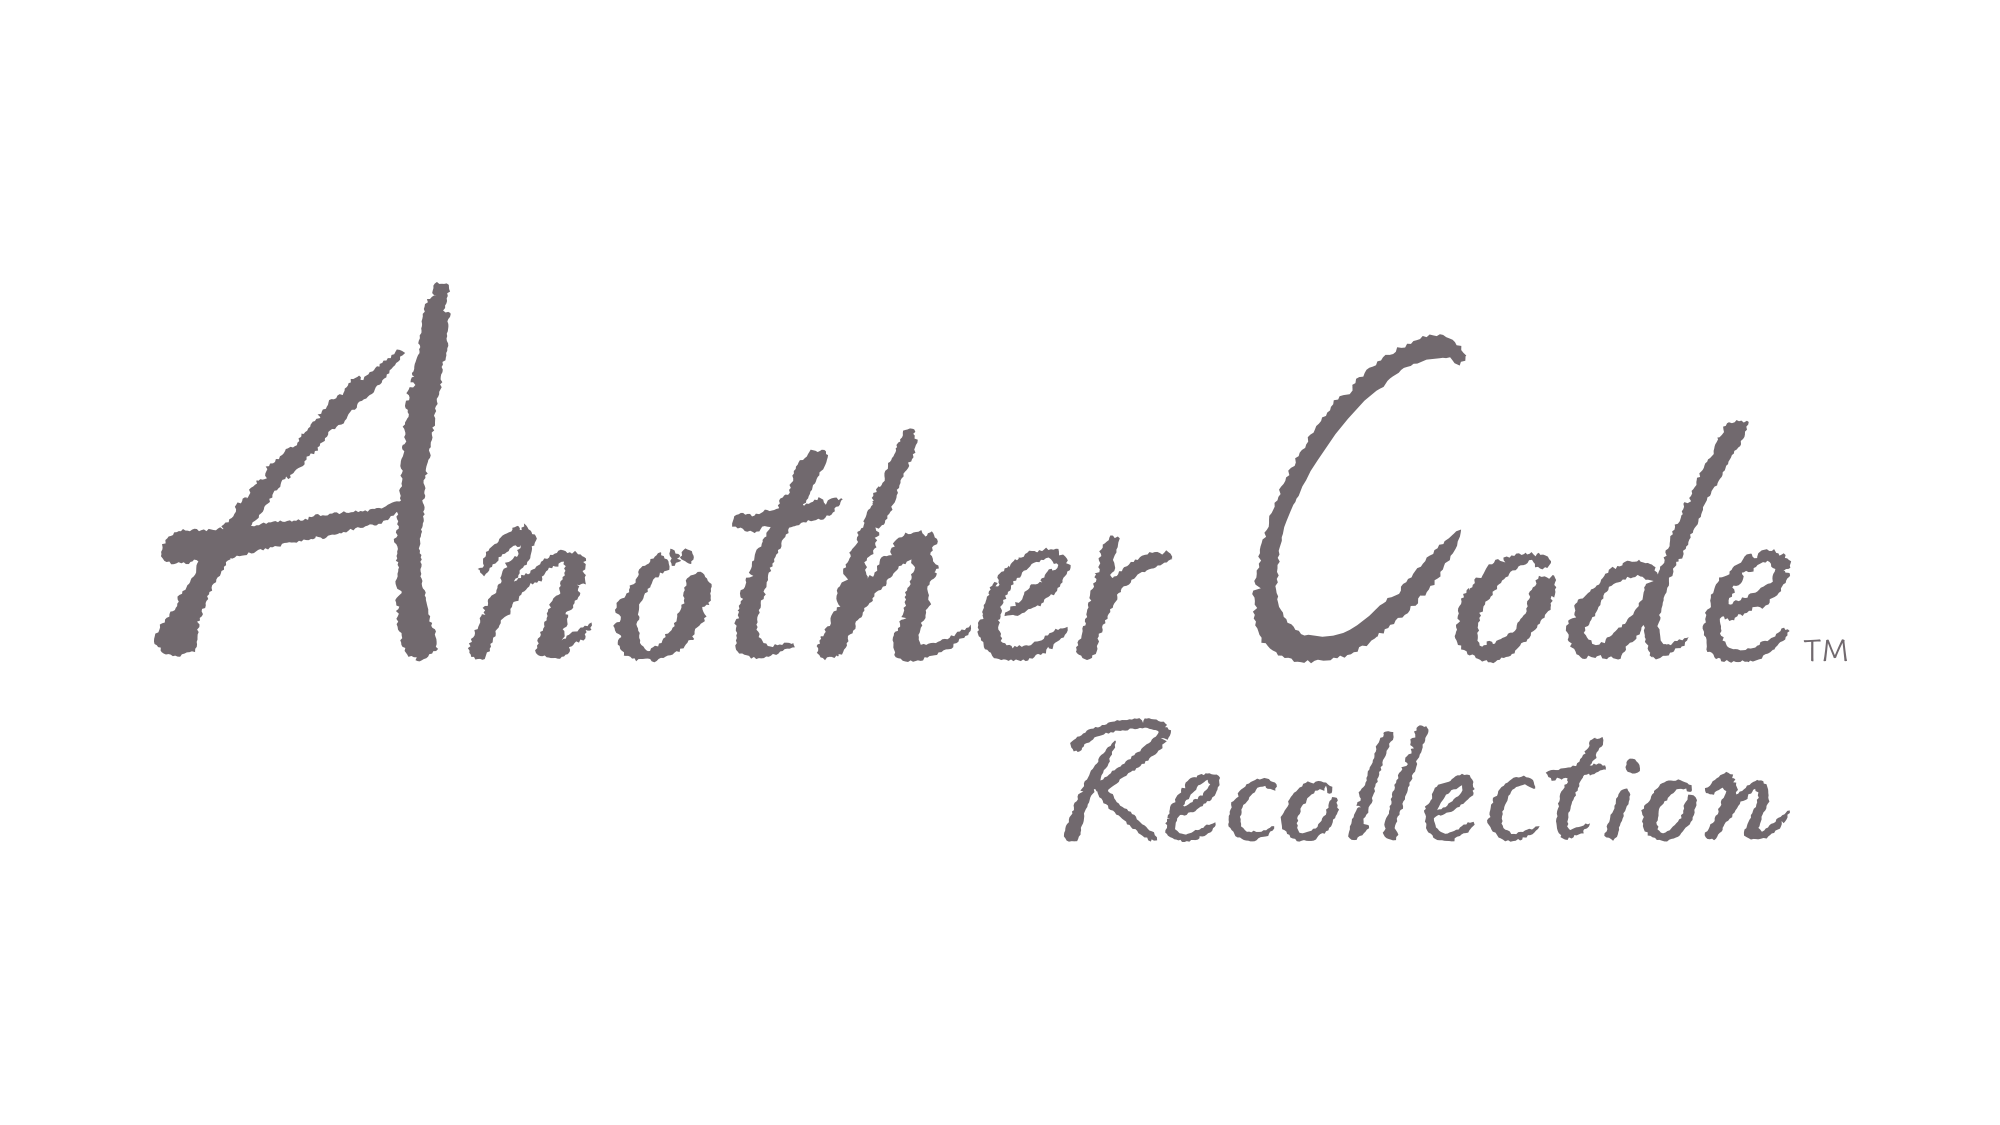 https://static.wikia.nocookie.net/anothercode/images/1/16/Another_Code_Recollection_EN_Logo.png/revision/latest?cb=20230919055146